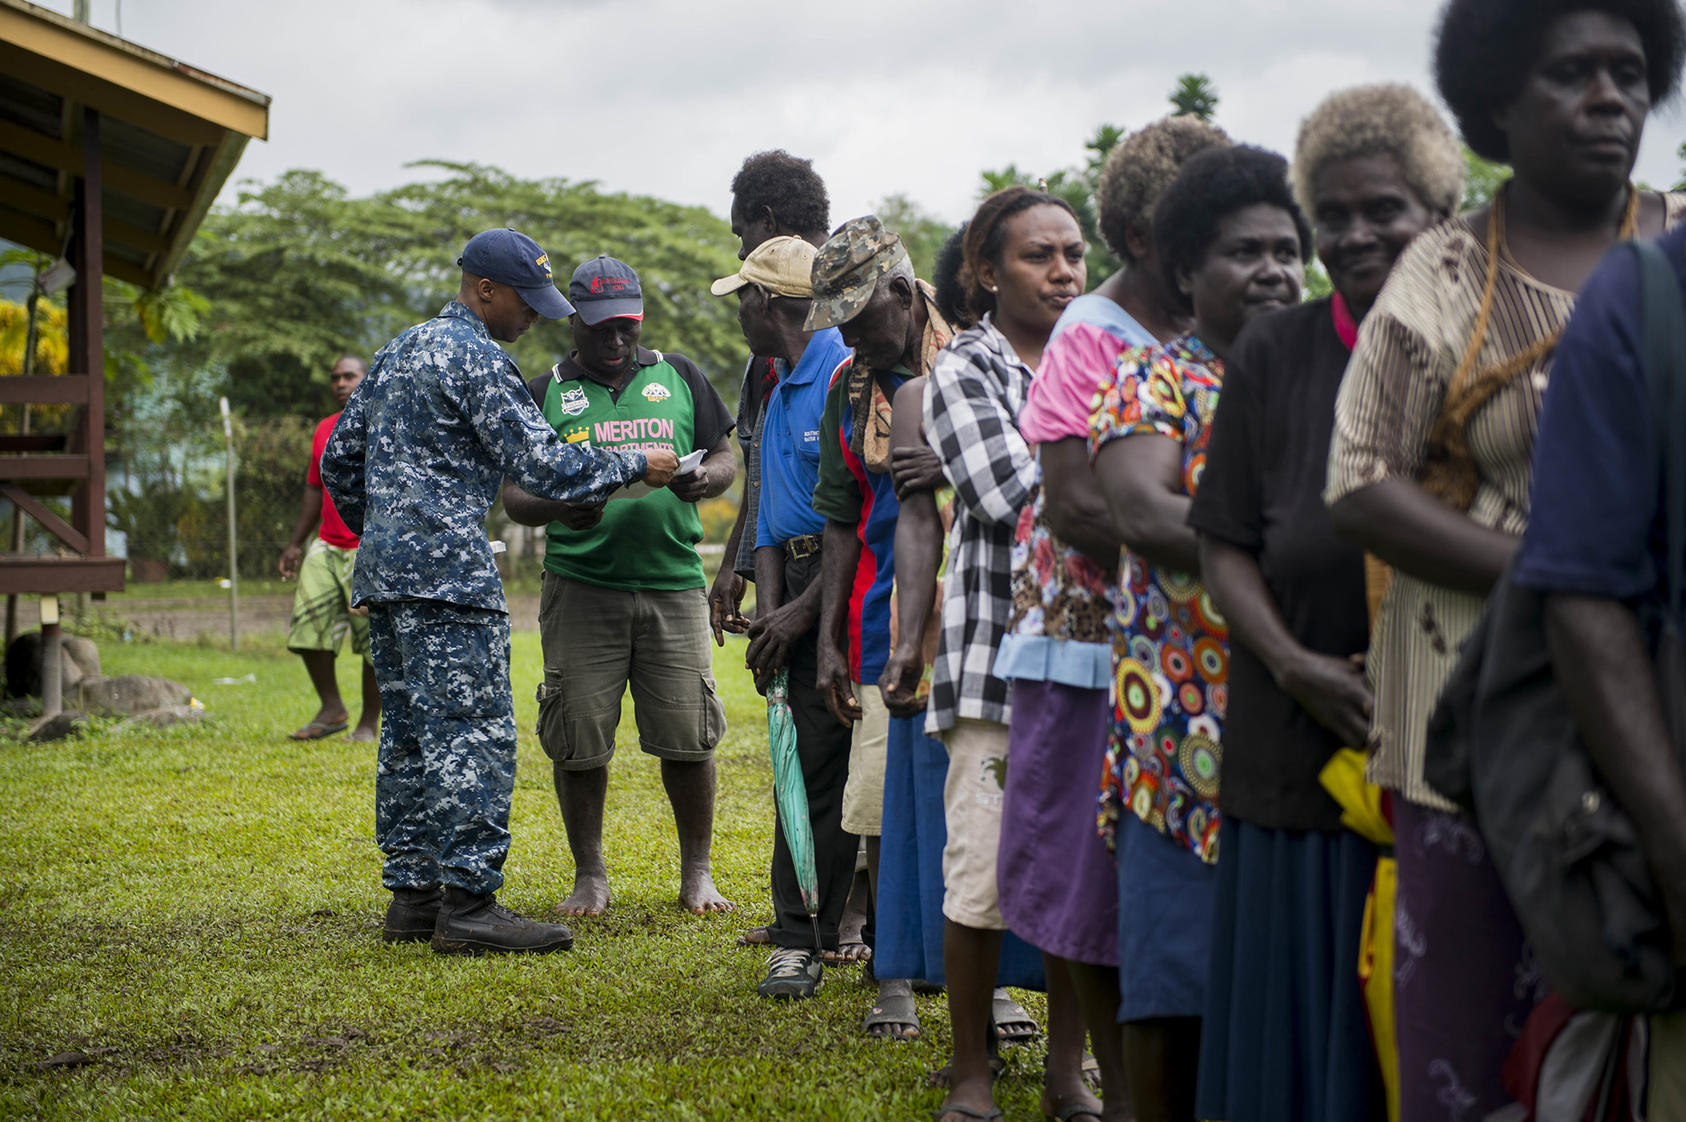 Residents of the autonomous region of Bougainville in Papua New Guinea wait in line as part of a community health engagement at the Arawa Medical Clinic, July 3, 2015. (SrA Peter Reft/Wikimedia)